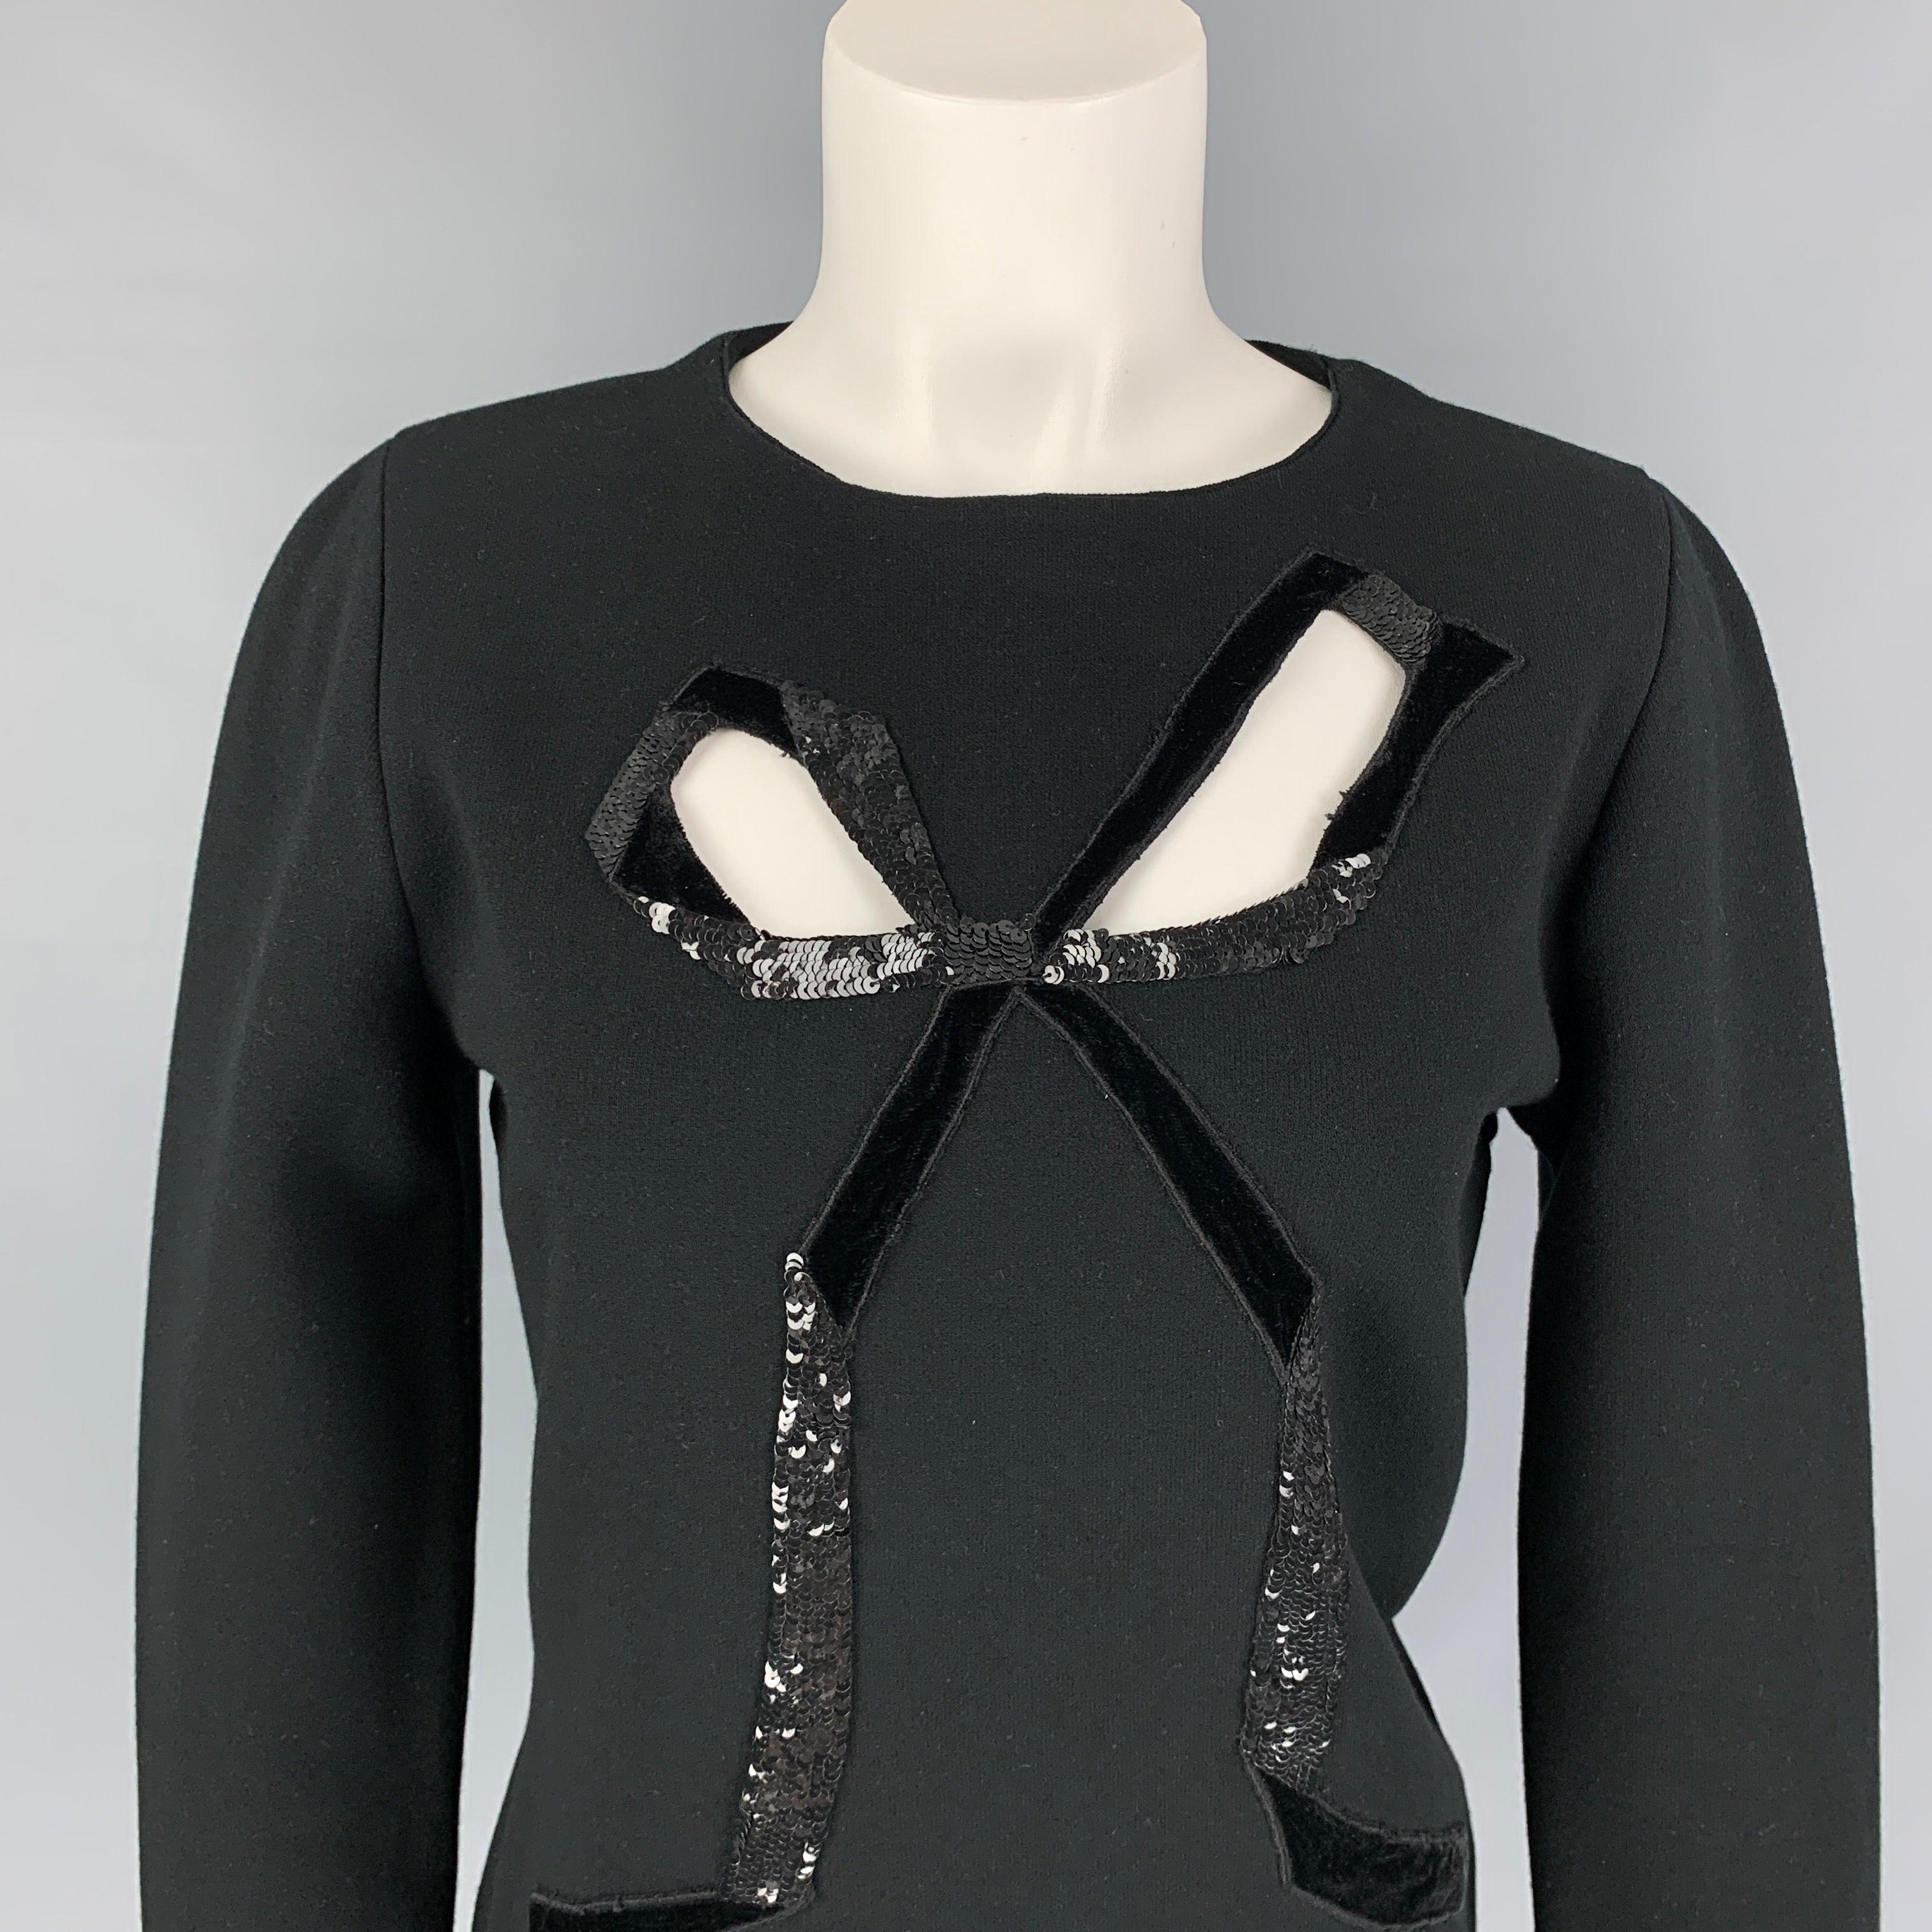 OSCAR DE LA RENTA 2021 pullover comes in a black viscose blend featuring a front cut-out bow design, sequin trim, and a crew-neck.
Very Good
Pre-Owned Condition. 

Marked:   L  

Measurements: 
 
Shoulder: 15.5 inches  Bust: 36 inches  Sleeve: 27